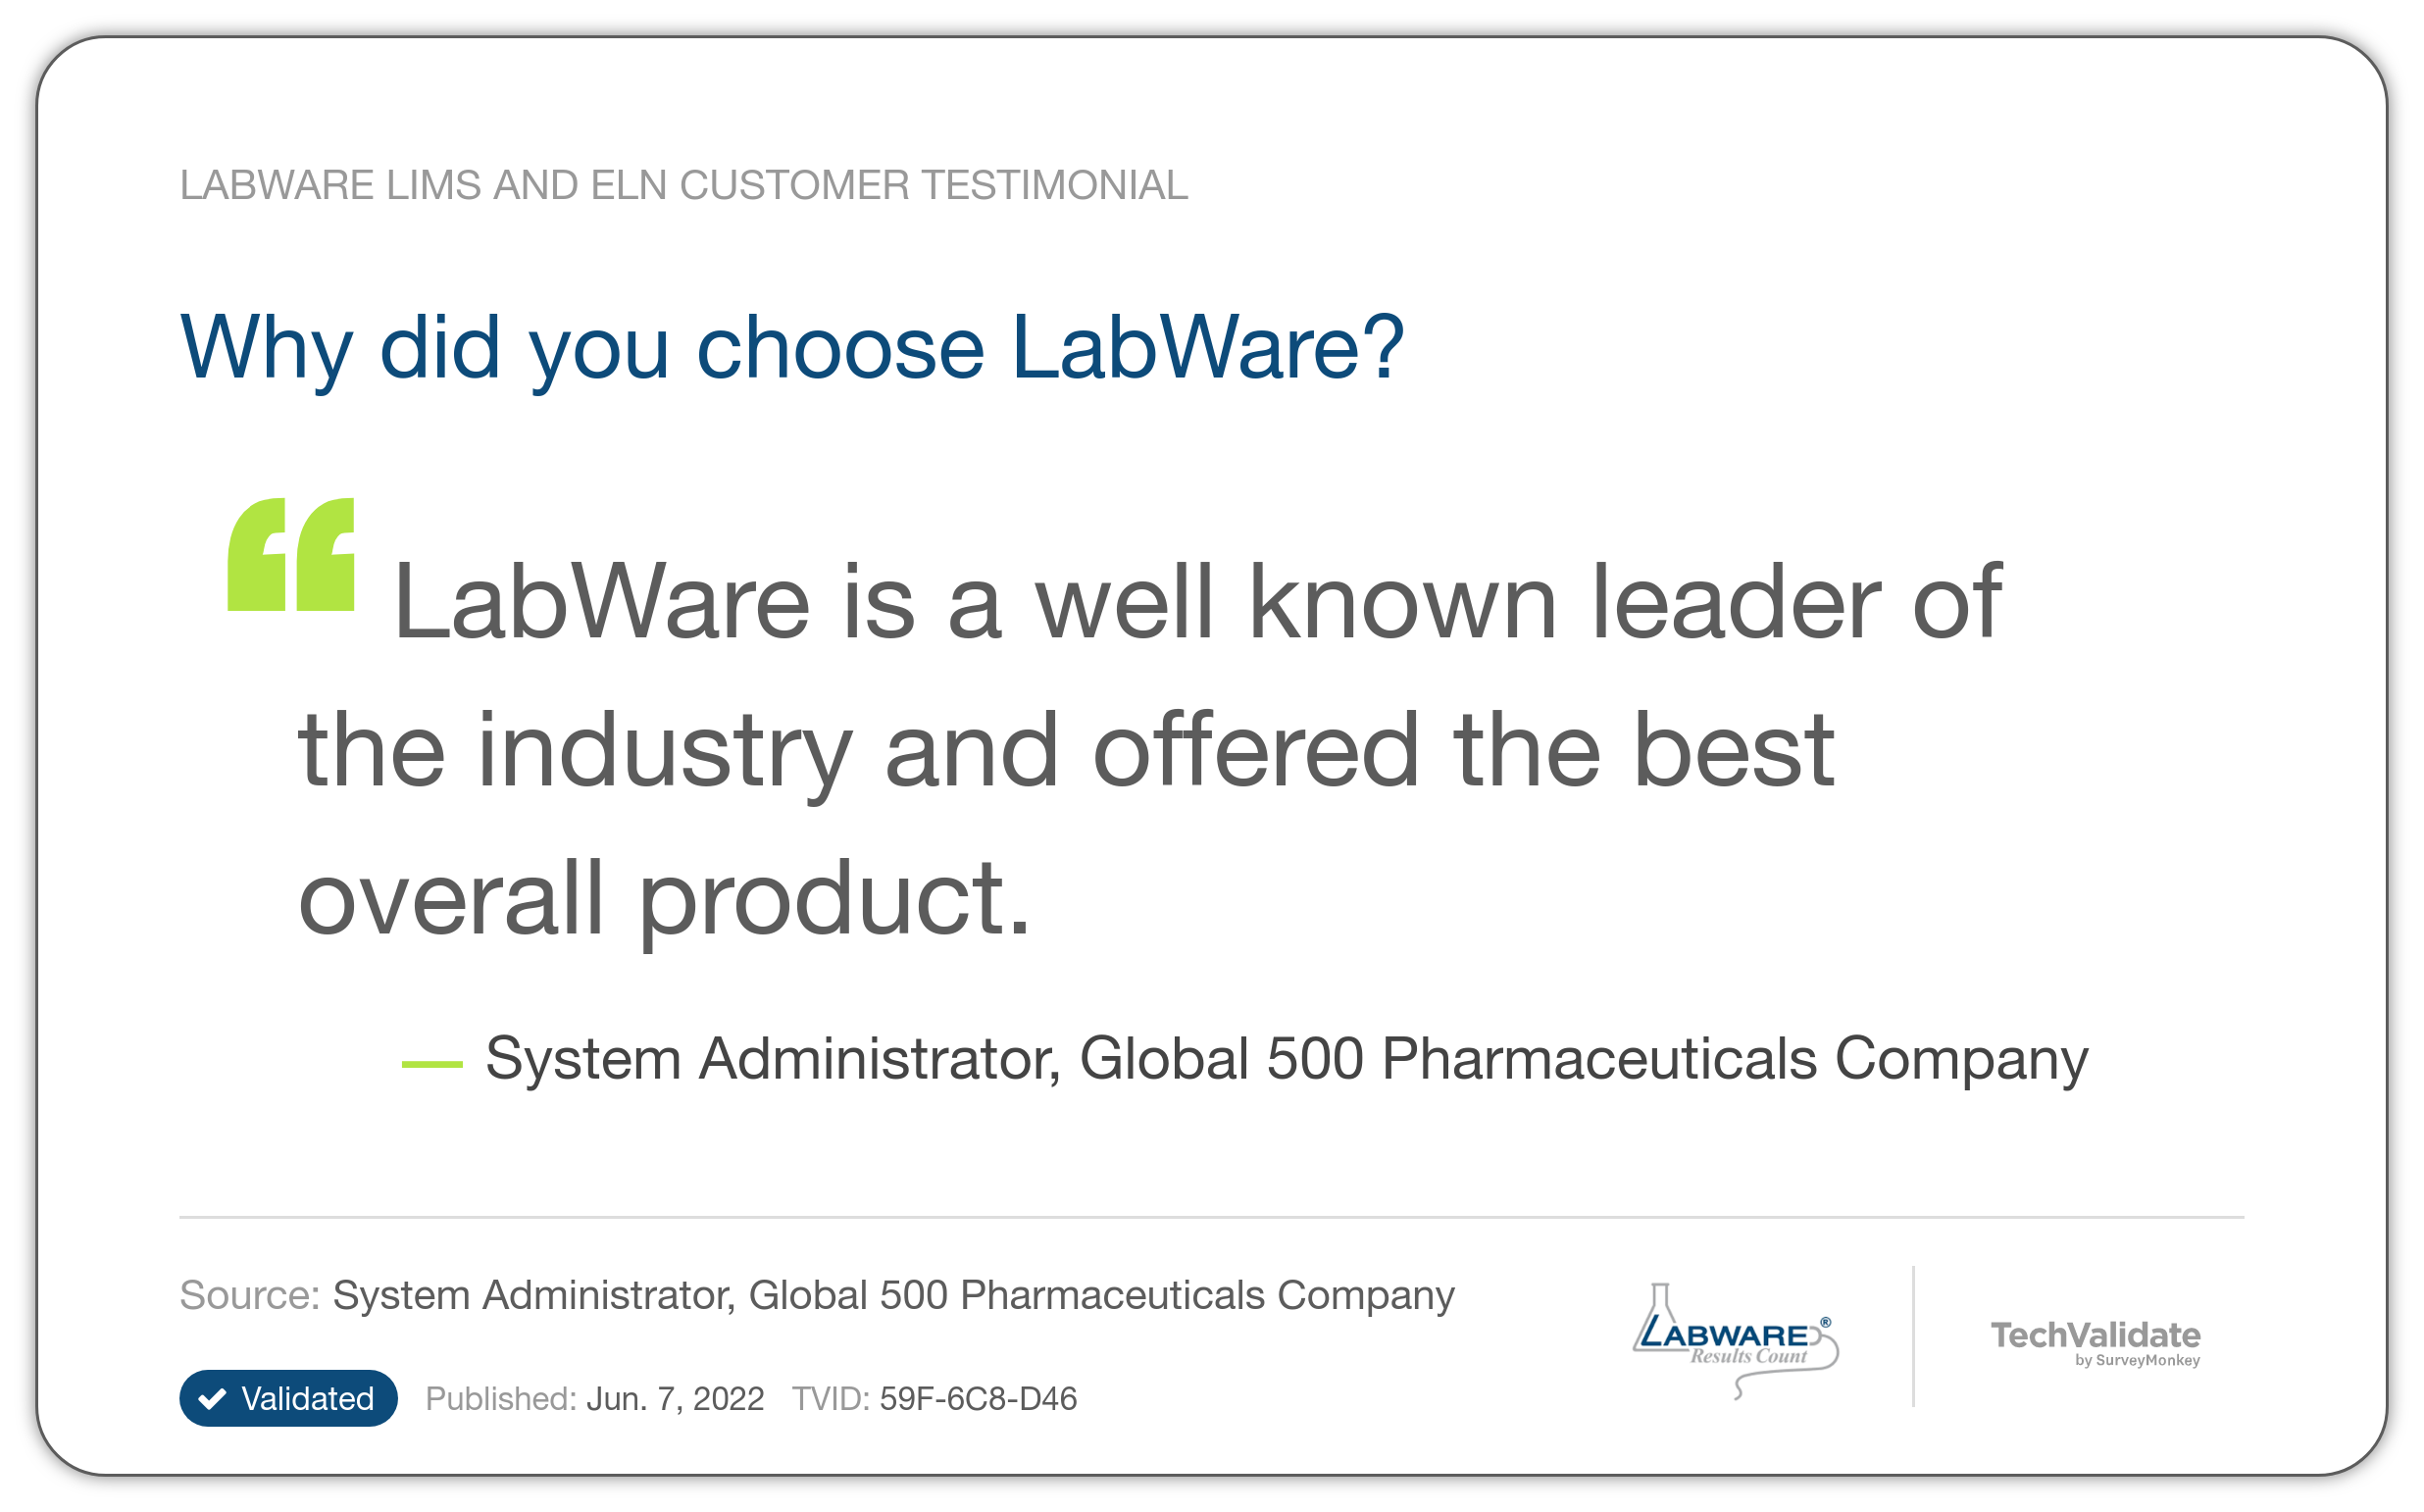 Why did you choose LabWare?